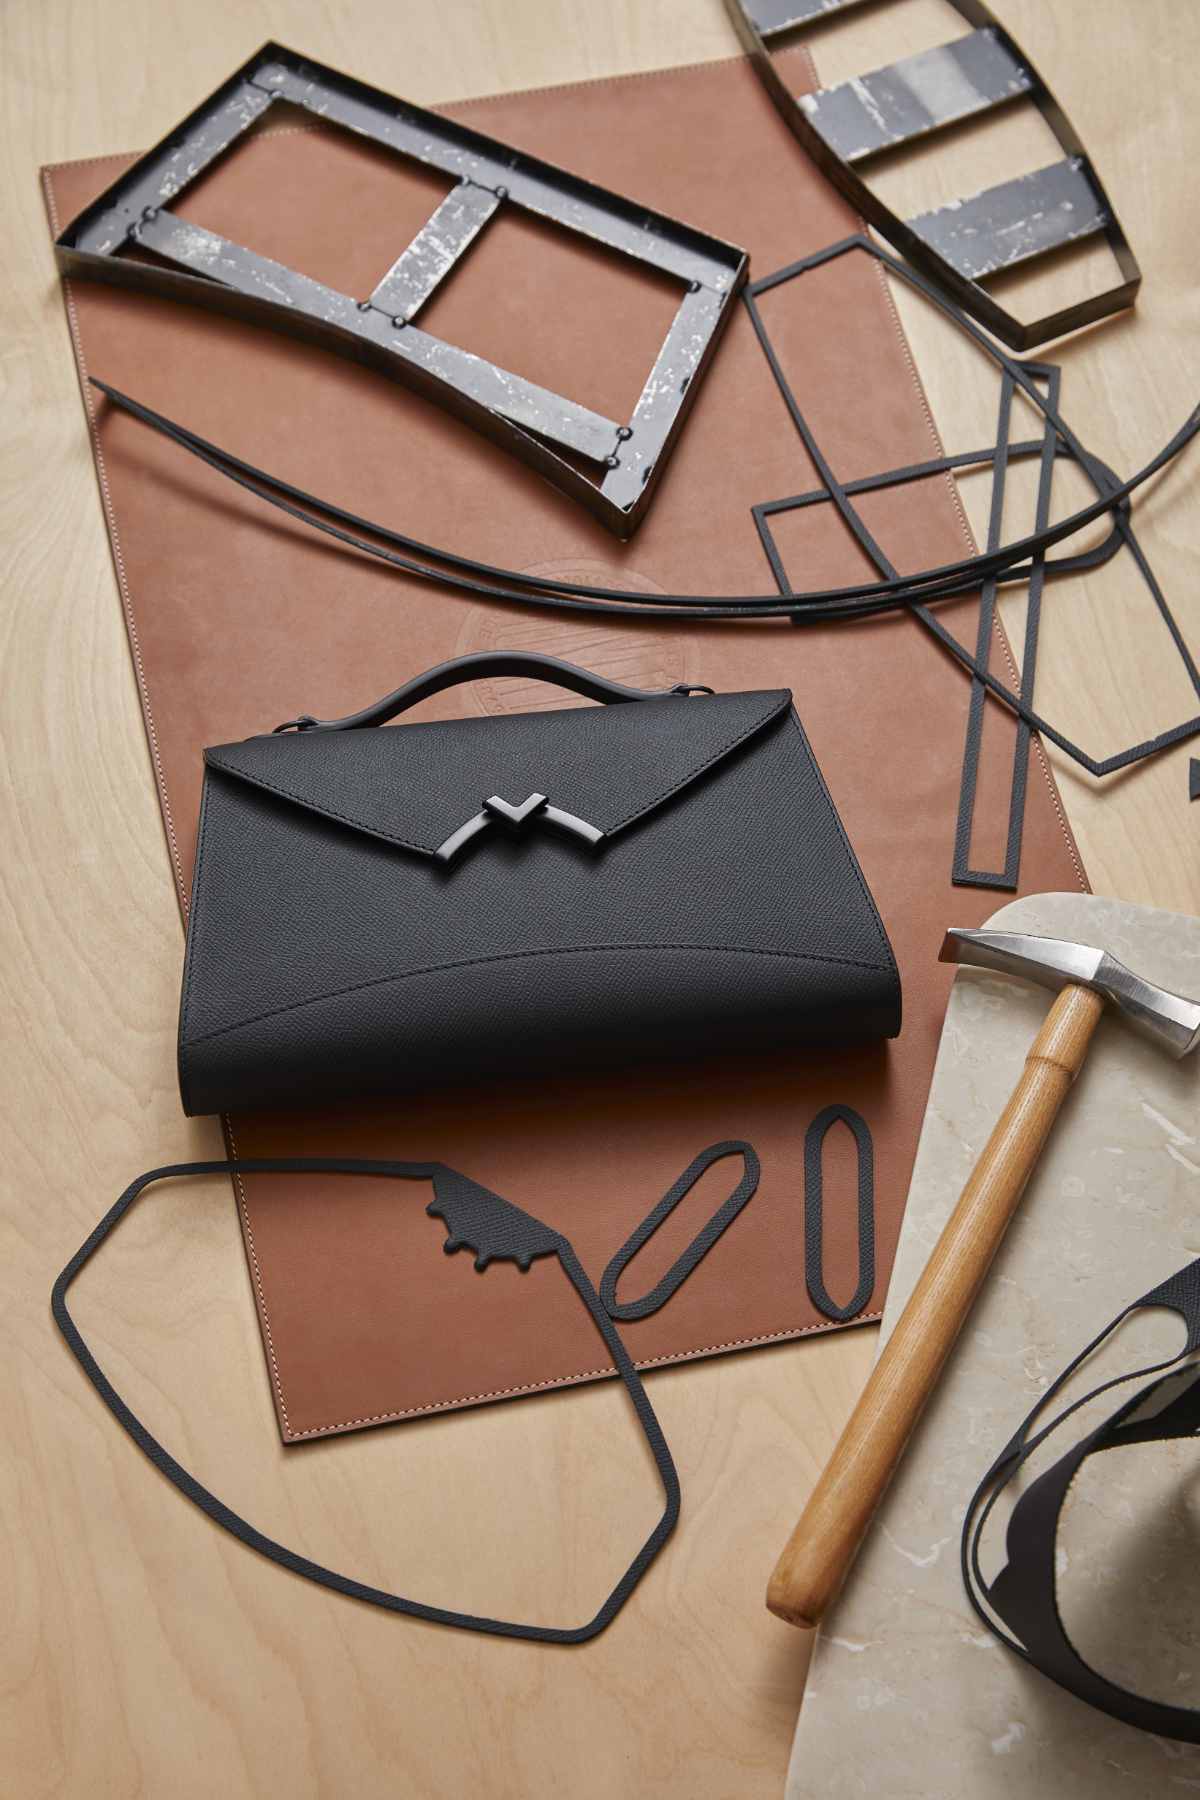 The Gabrielle, An Emblematic Bag Of Moynat - Luxferity Magazine